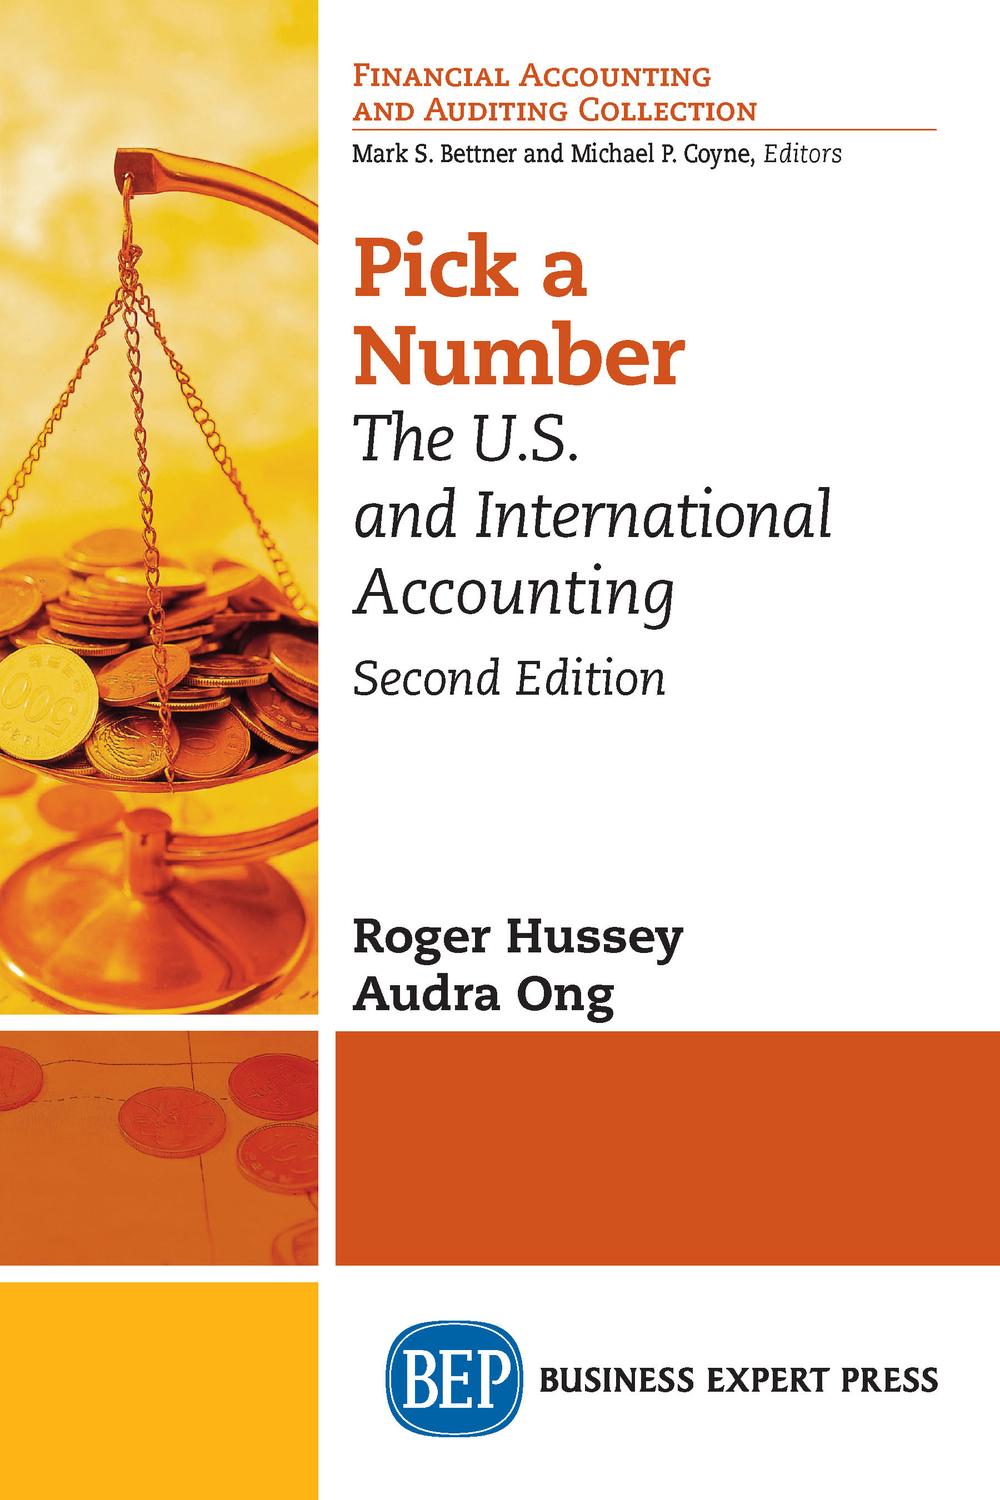 pick a number the u.s. and international accounting 2nd edition roger hussey, audra ong 1947098942,